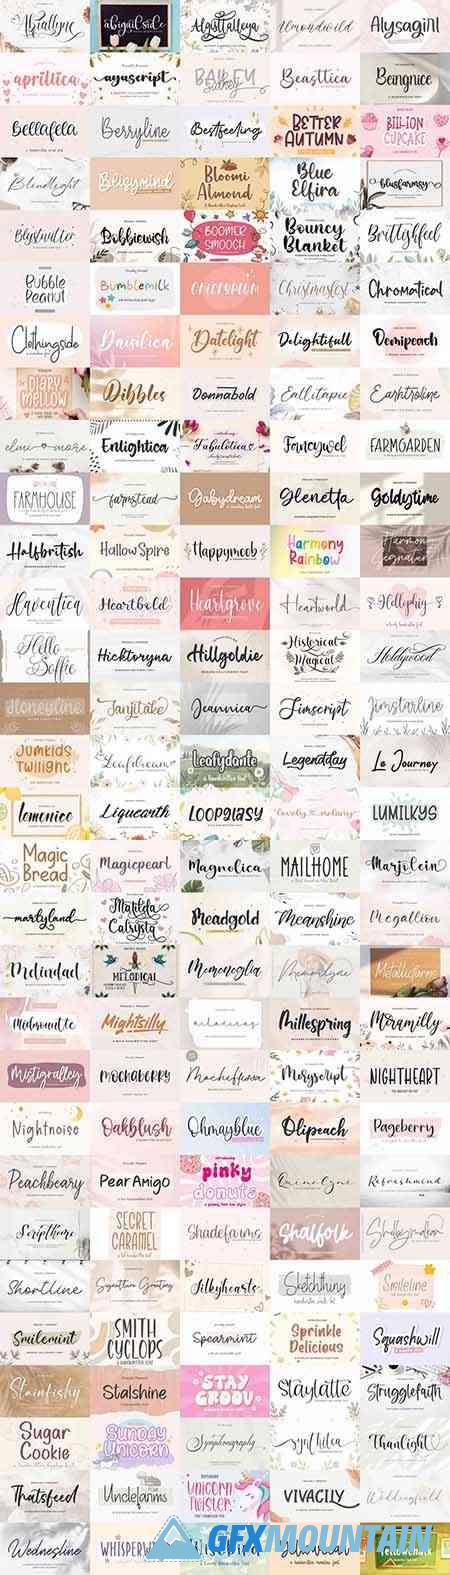 The Handwritten Collections Font Bundle